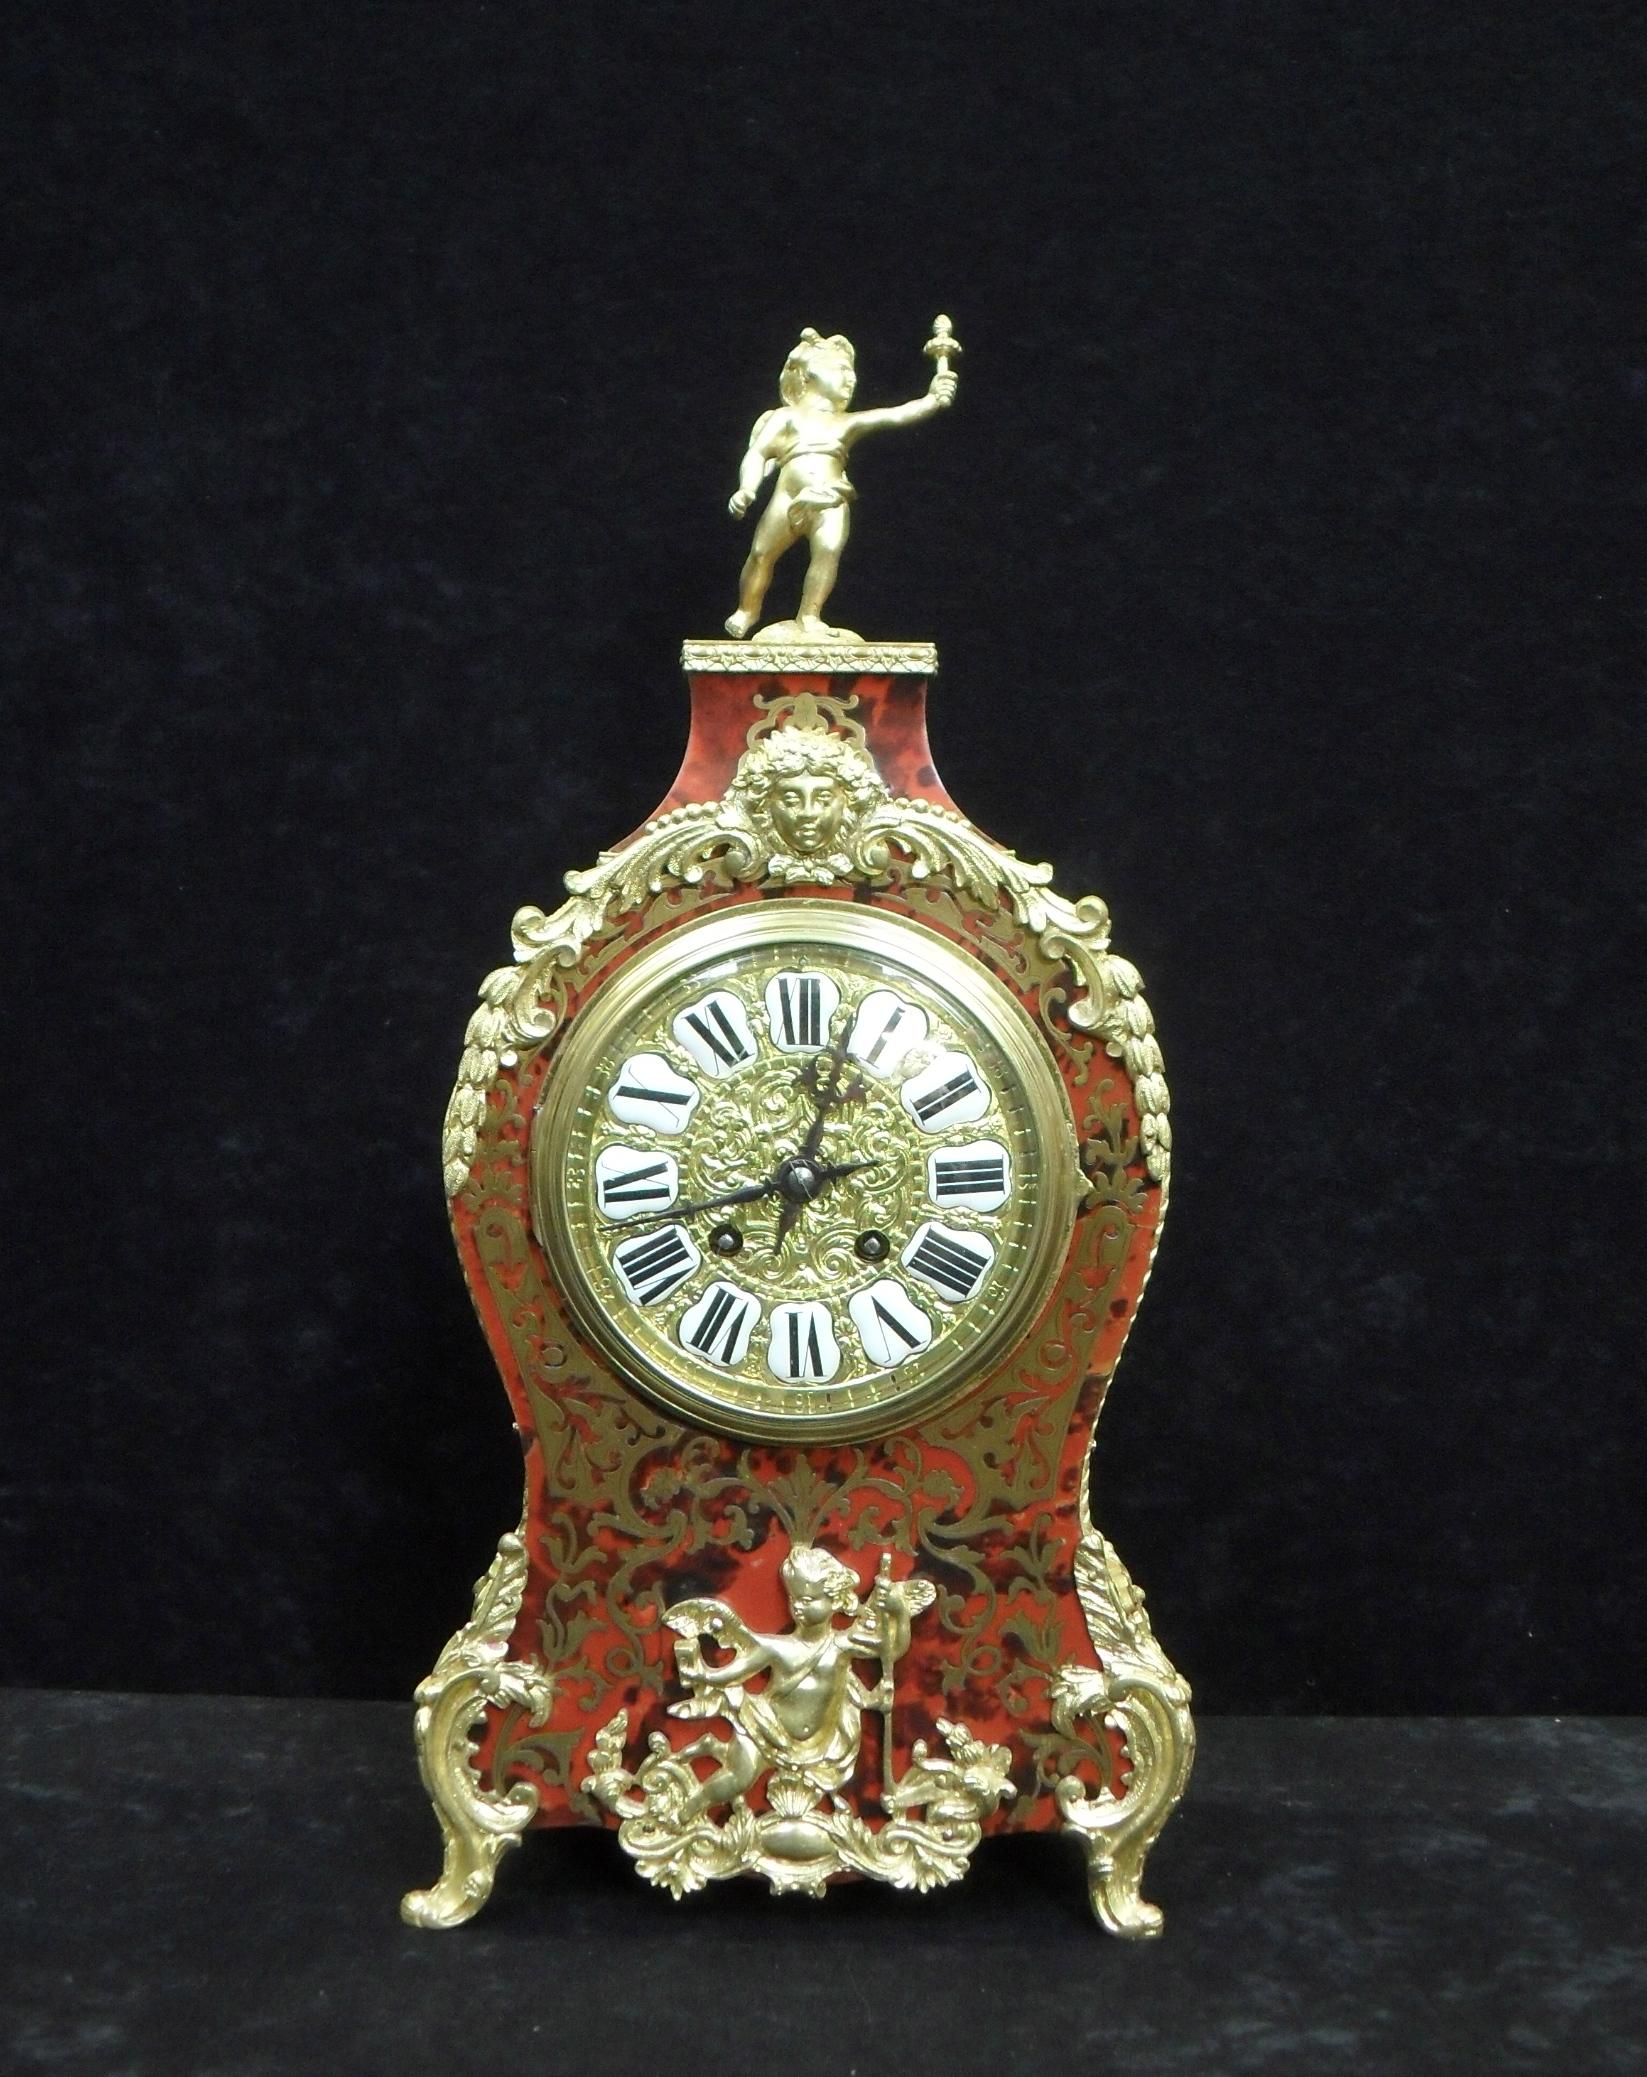 A very good quality French Louis XV style boulle red tortoise shell and brass inlaid mantel clock with ormolu mounts. The clock has a decorative brass dial with white enamel numerals and an eight day French movement which strikes the hours and half